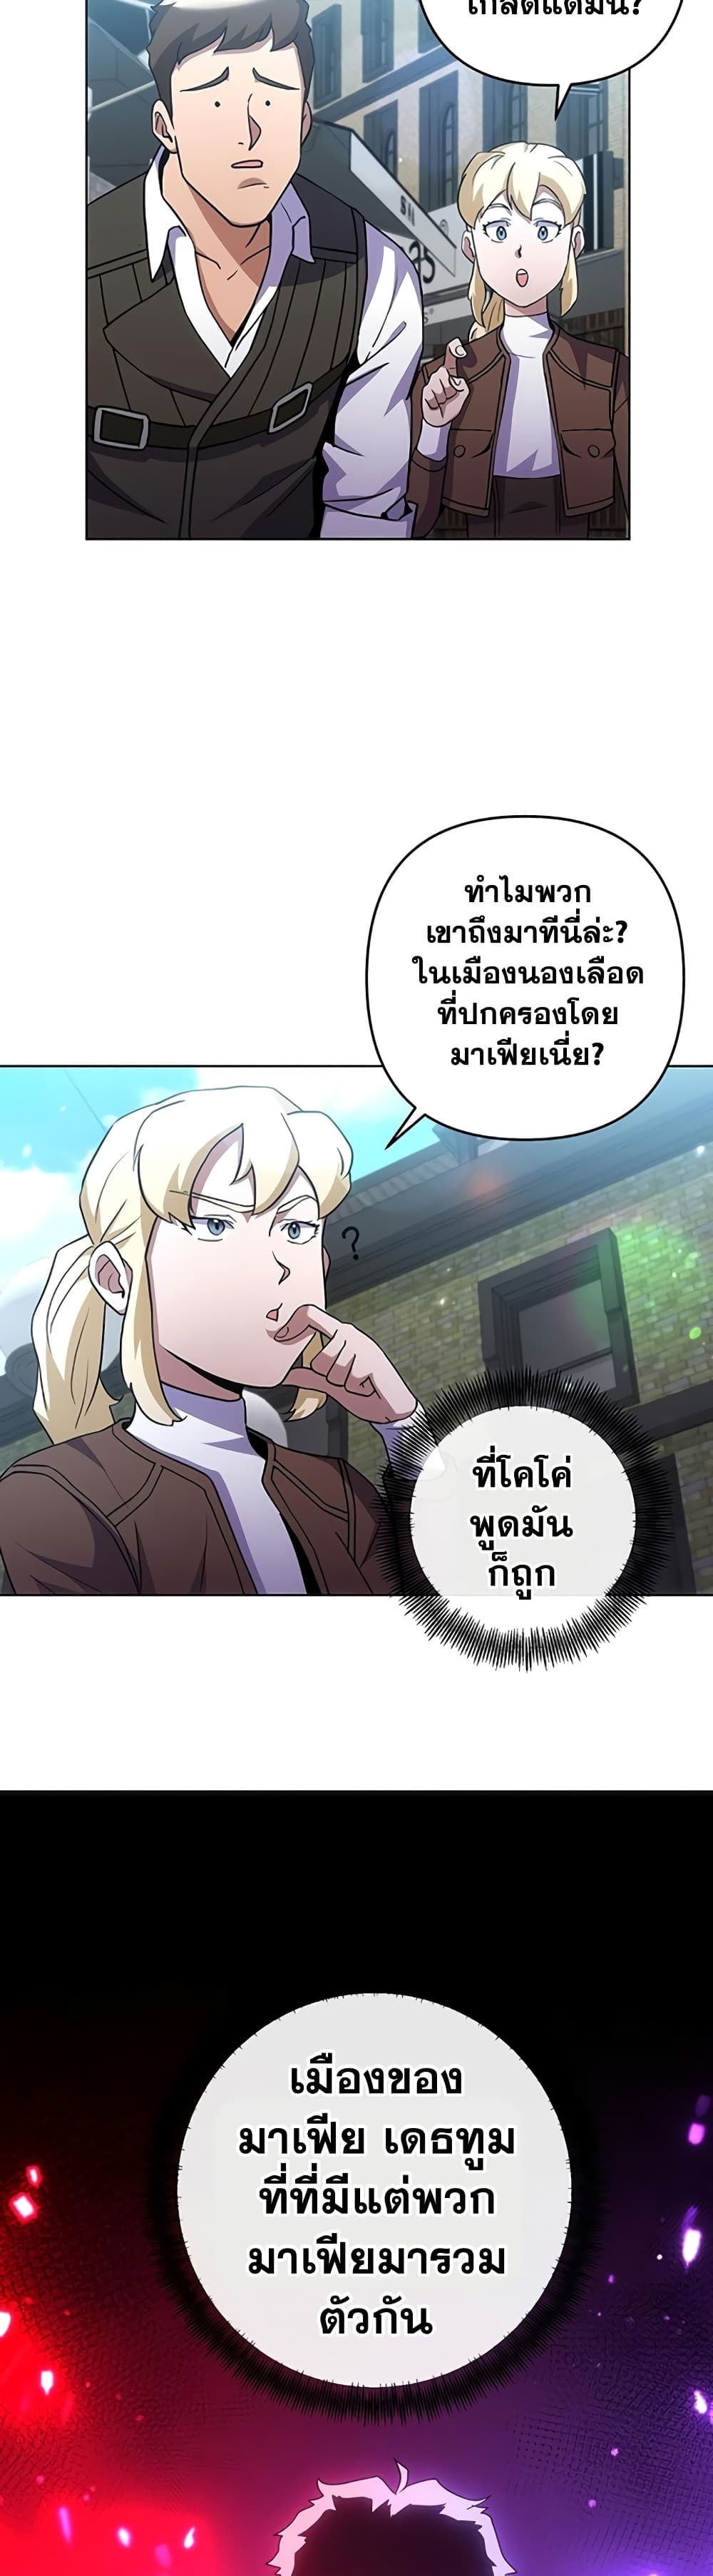 Surviving in an Action Manhwa 18 06